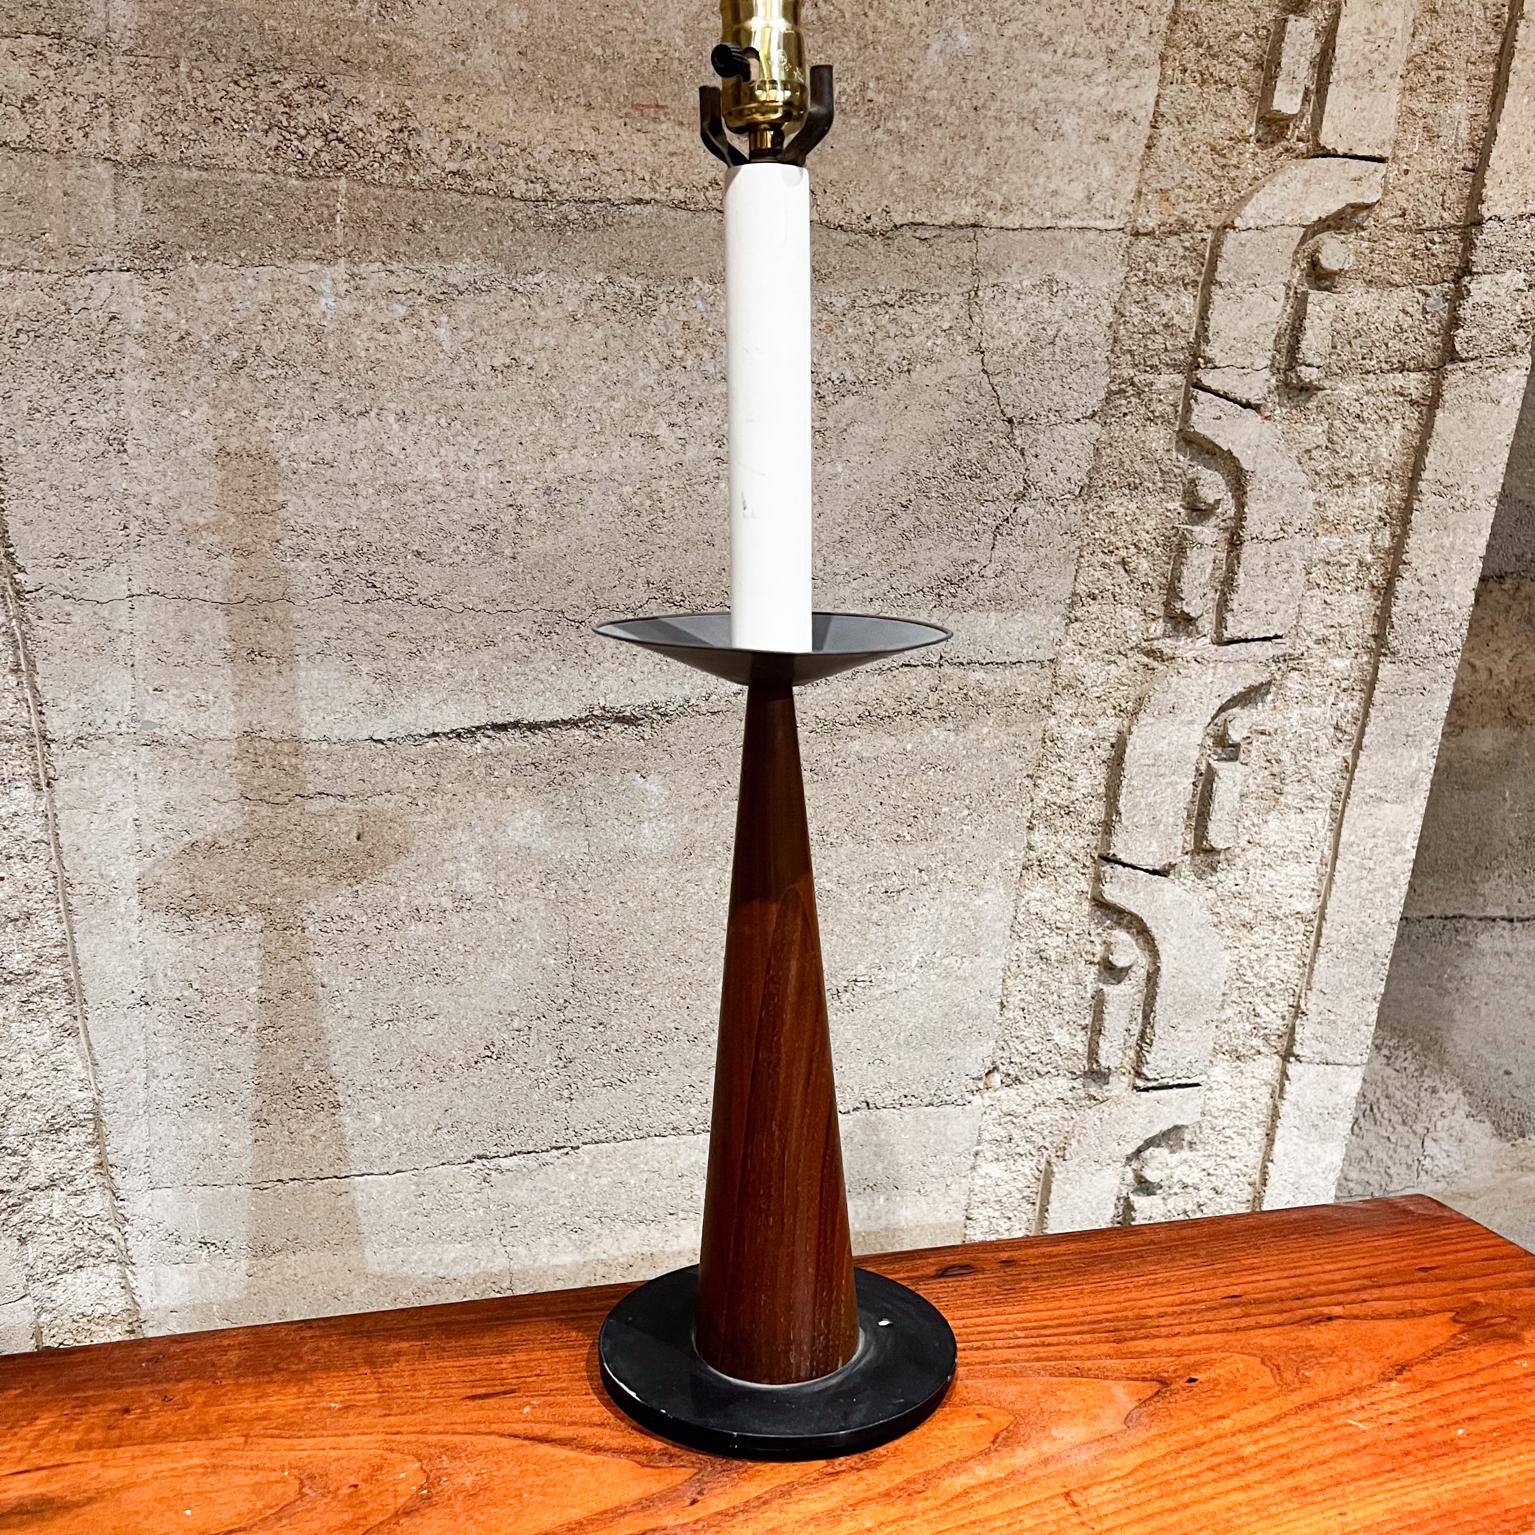 1960s Mexican Modernism Custom Cone Shaped Table Lamp
Handmade Mexico
Mahogany Wood and Bronze
23.5 h x 6 diameter at widest
Original Preowned Vintage Unrestored Condition.
Lamp shade is not included.
Please refer to images provided.